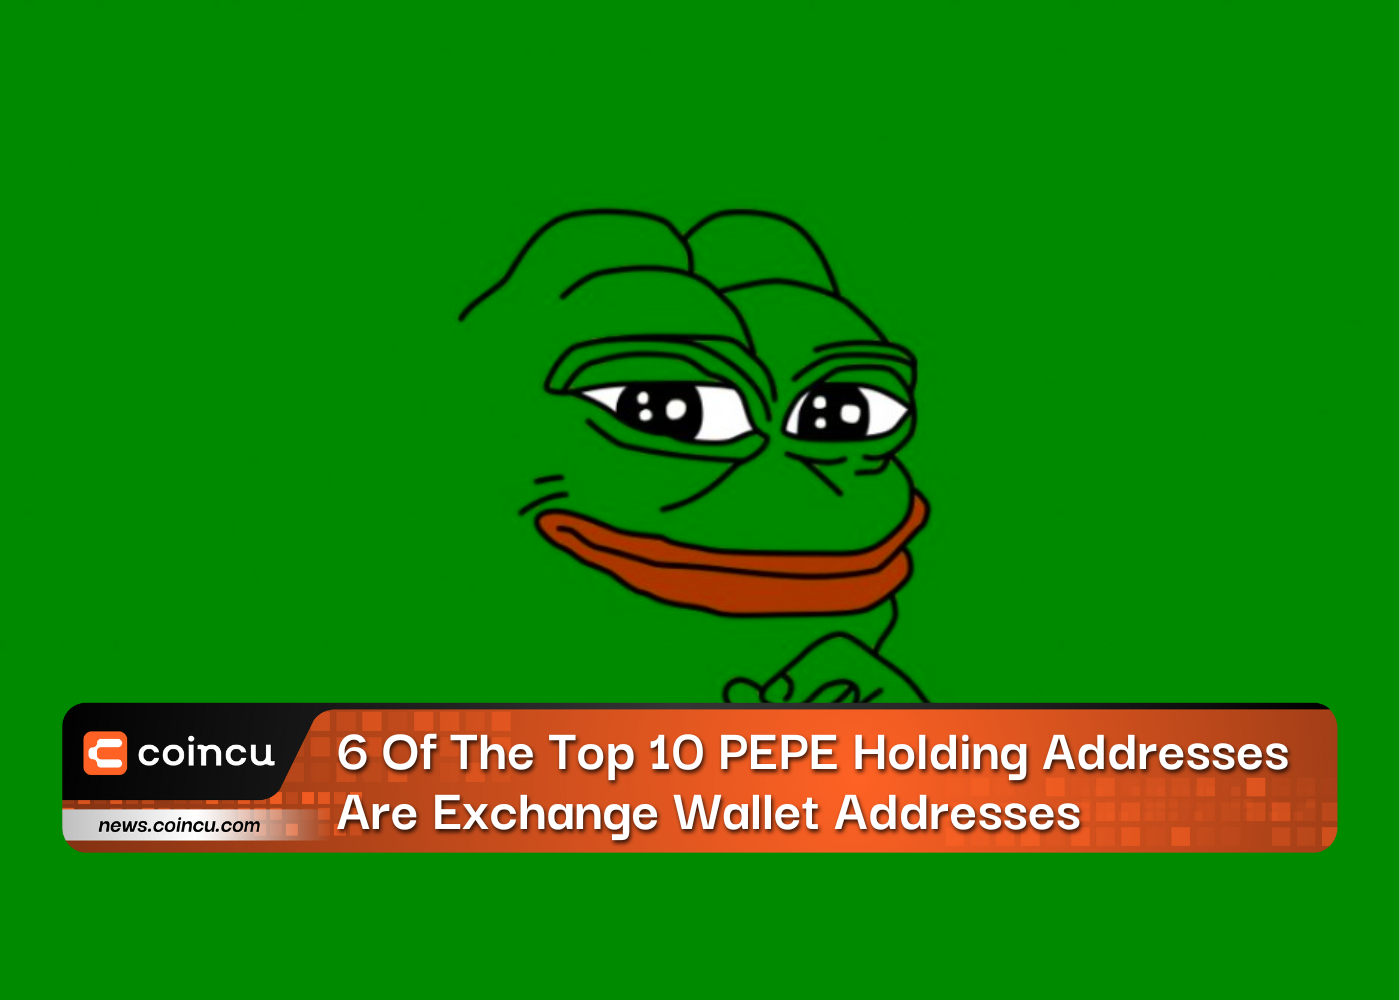 6 Of The Top 10 PEPE Holding Addresses Are Exchange Wallet Addresses